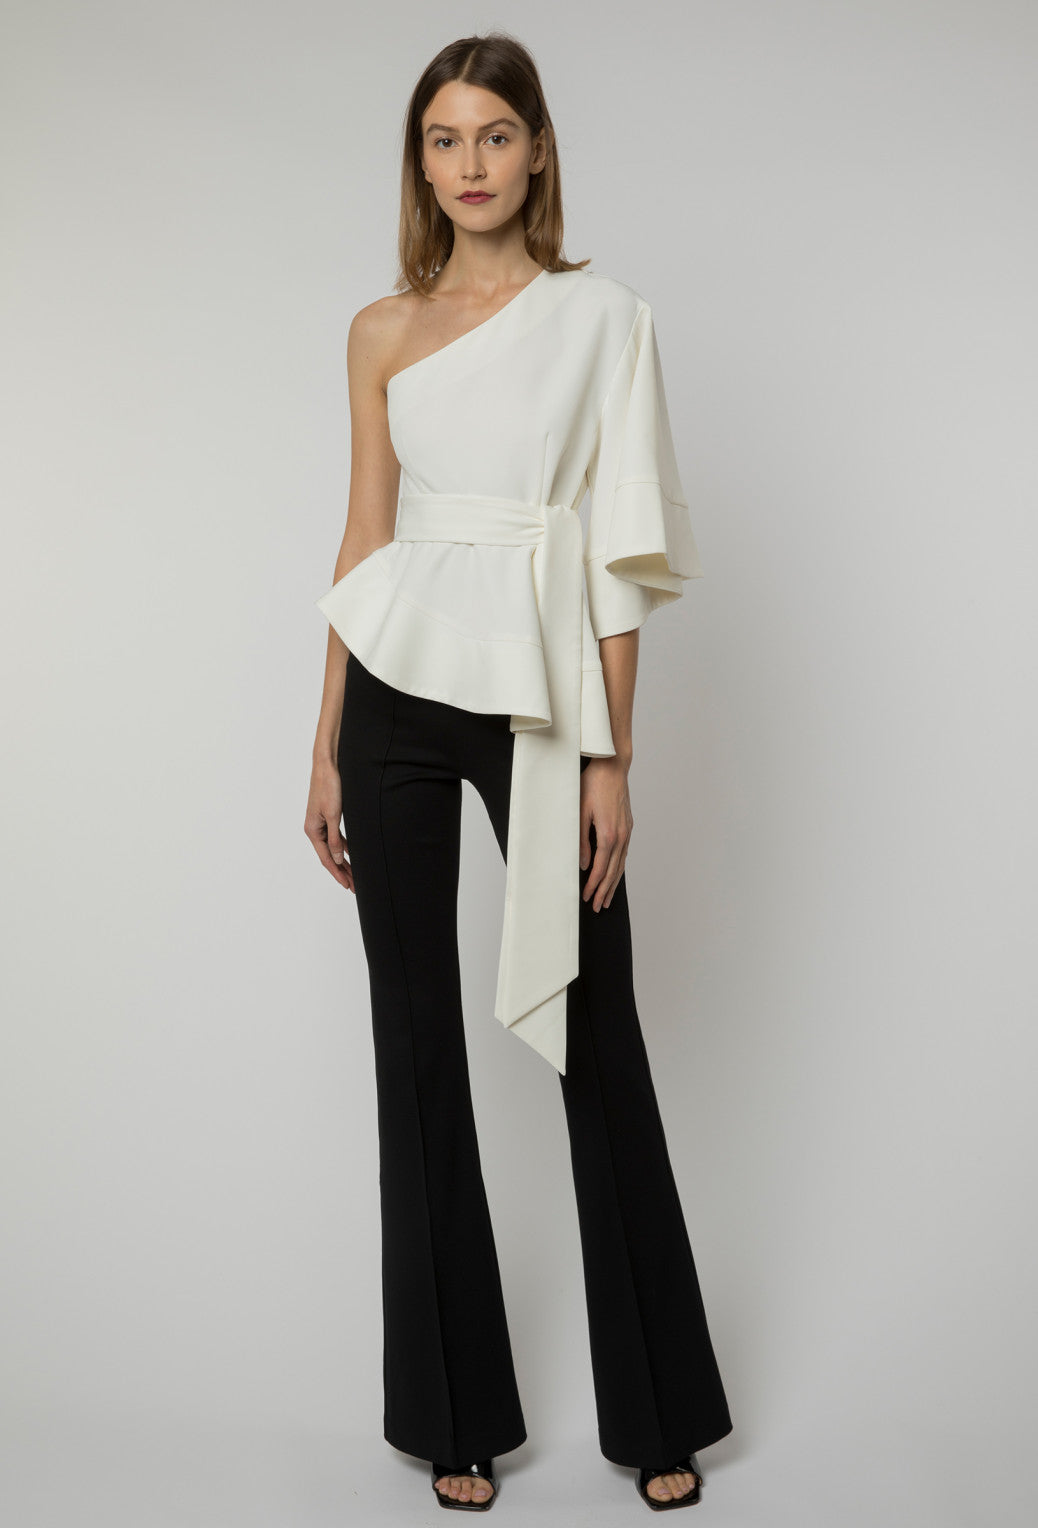 Off-White Tie-Waist Asymmetrical Top With Pants